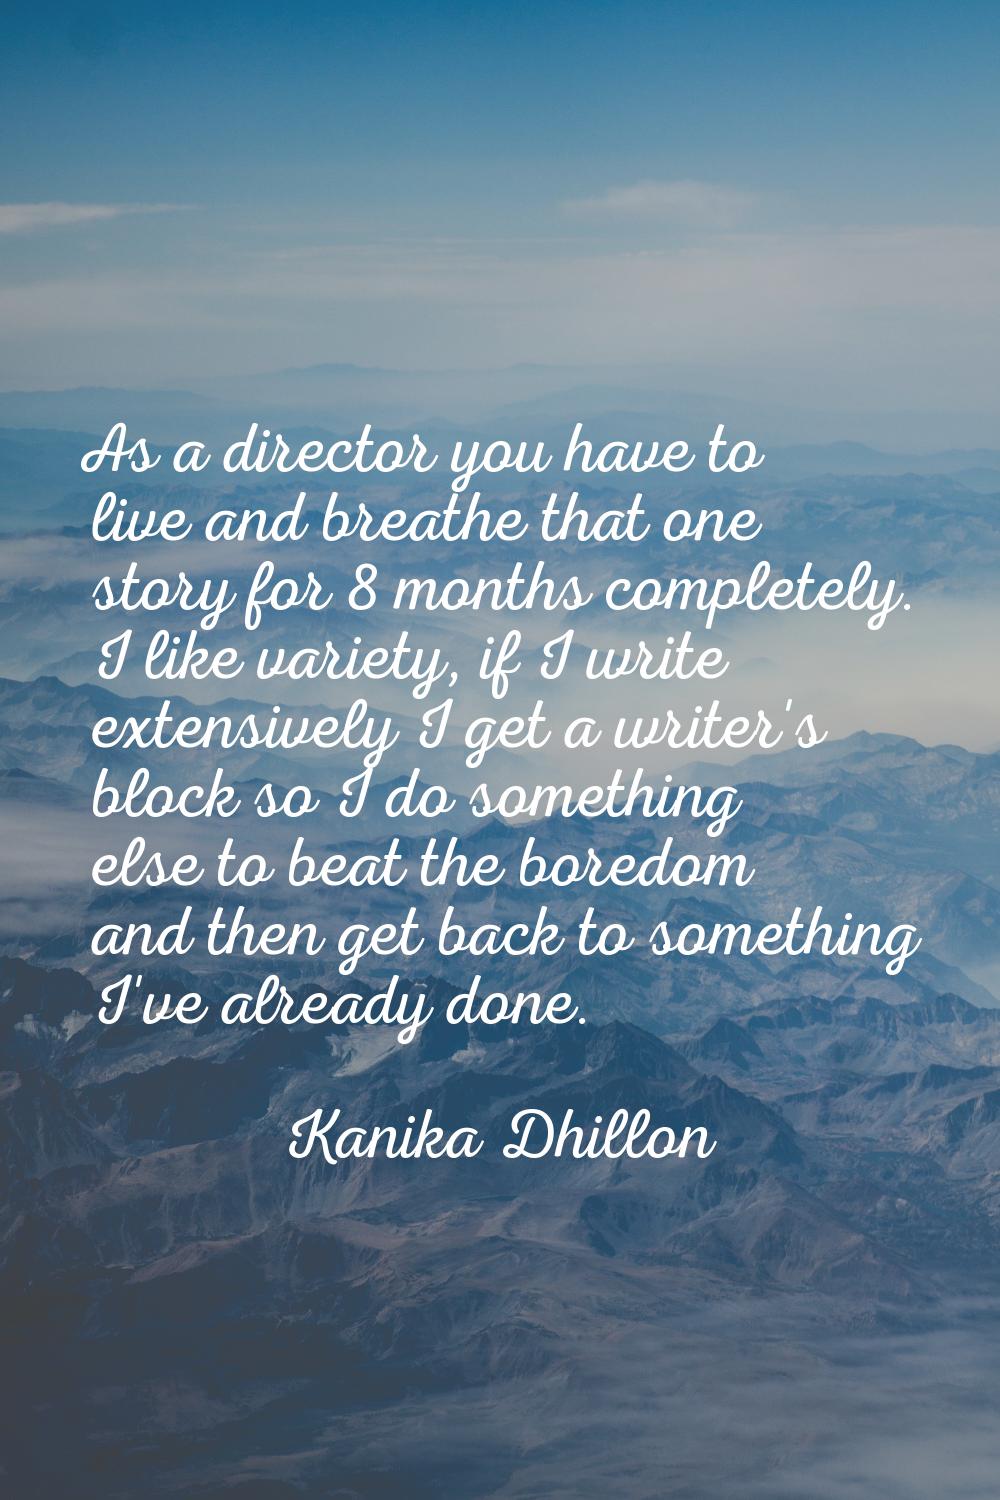 As a director you have to live and breathe that one story for 8 months completely. I like variety, 